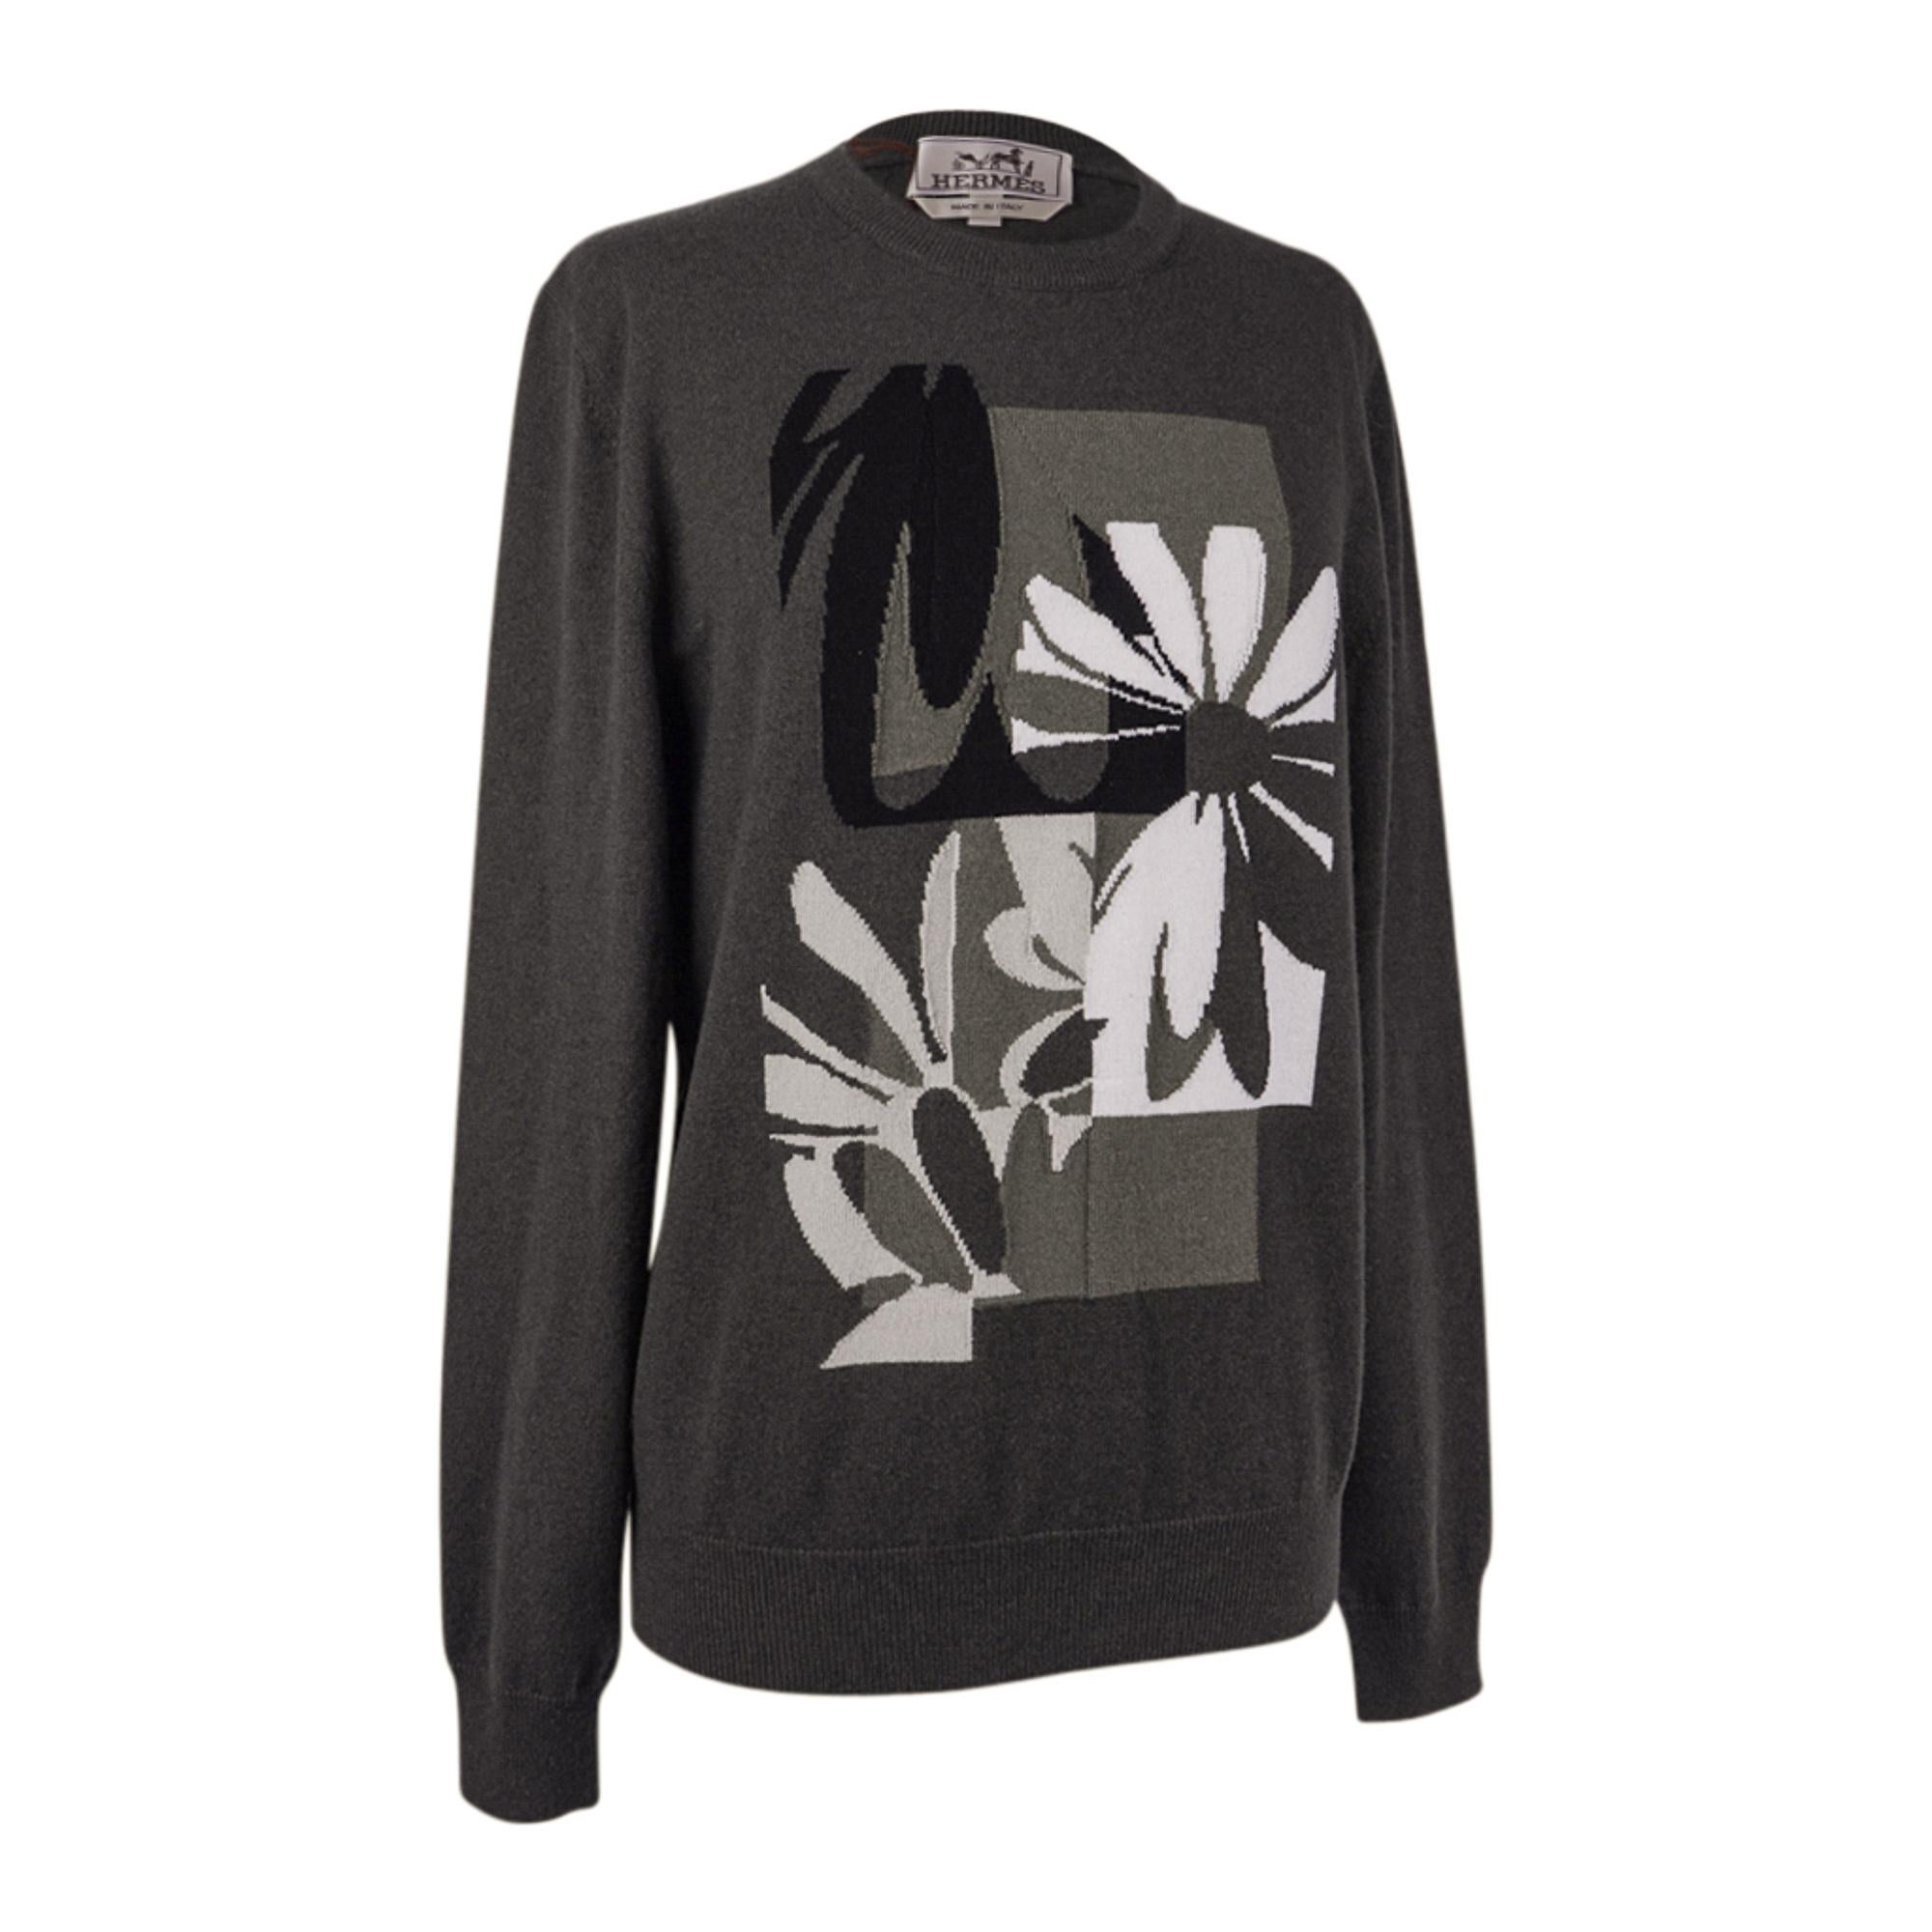 Mightychic offers an Hermes Men's Puzzle Floral Cashmere Crewneck sweater featured in Algue.
Sweater has floral intarsia motif in front.
Ribbing at cuffs, hip and neck.
One gauge 12 thread.
Fabric is cashmere.
NEW or NEVER WORN.
final sale

SIZE